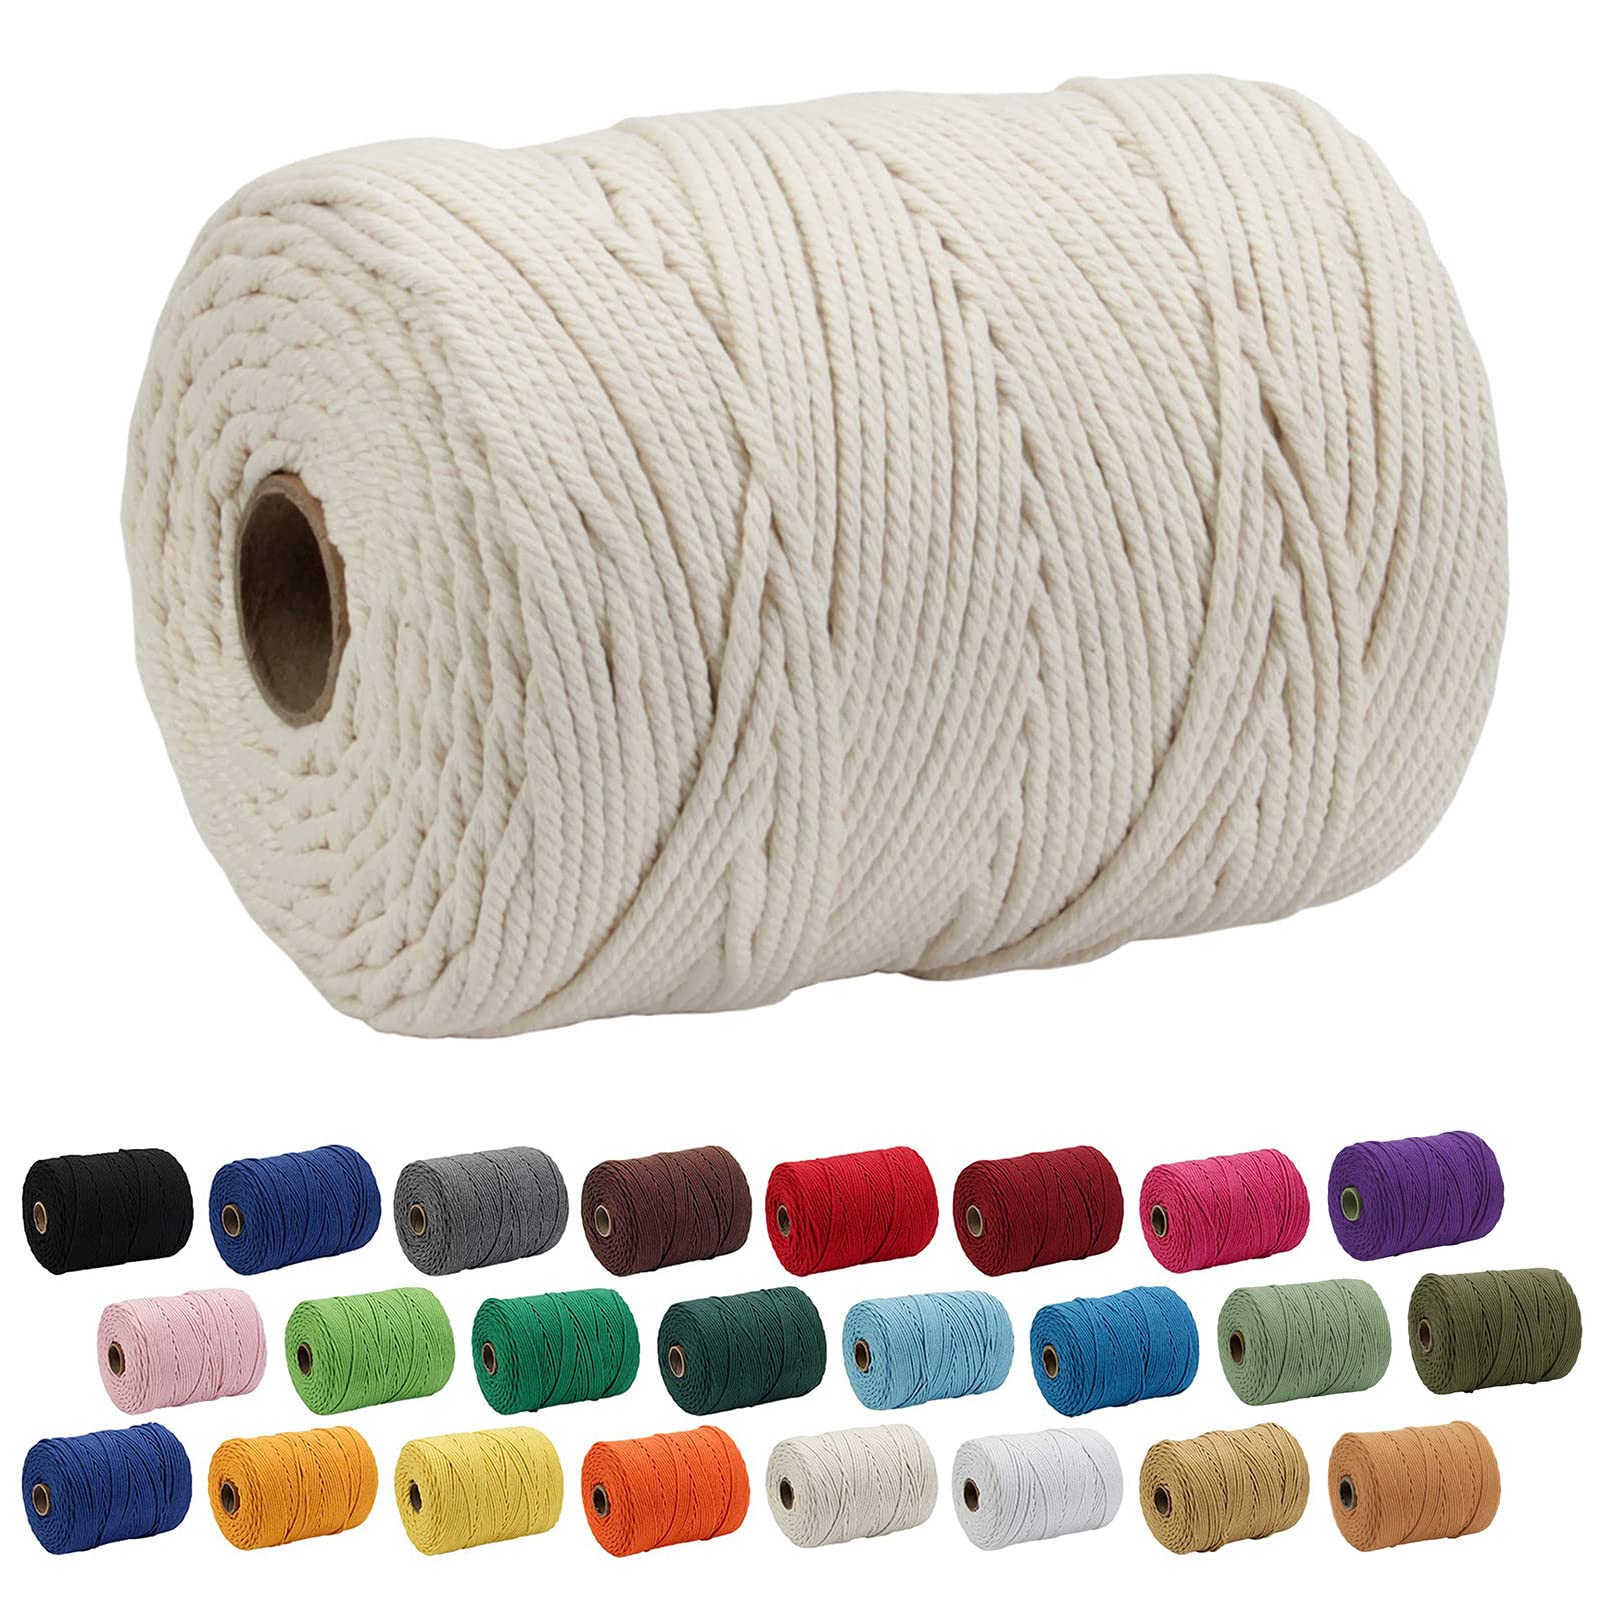 XIANGZI Macrame Cord 4mm x 109Yards (328Feet),100% Natural Cotton Macrame  Rope-4 Strand Twisted Cotton Cord for Macrame Supplies DIY Crafts Knitting